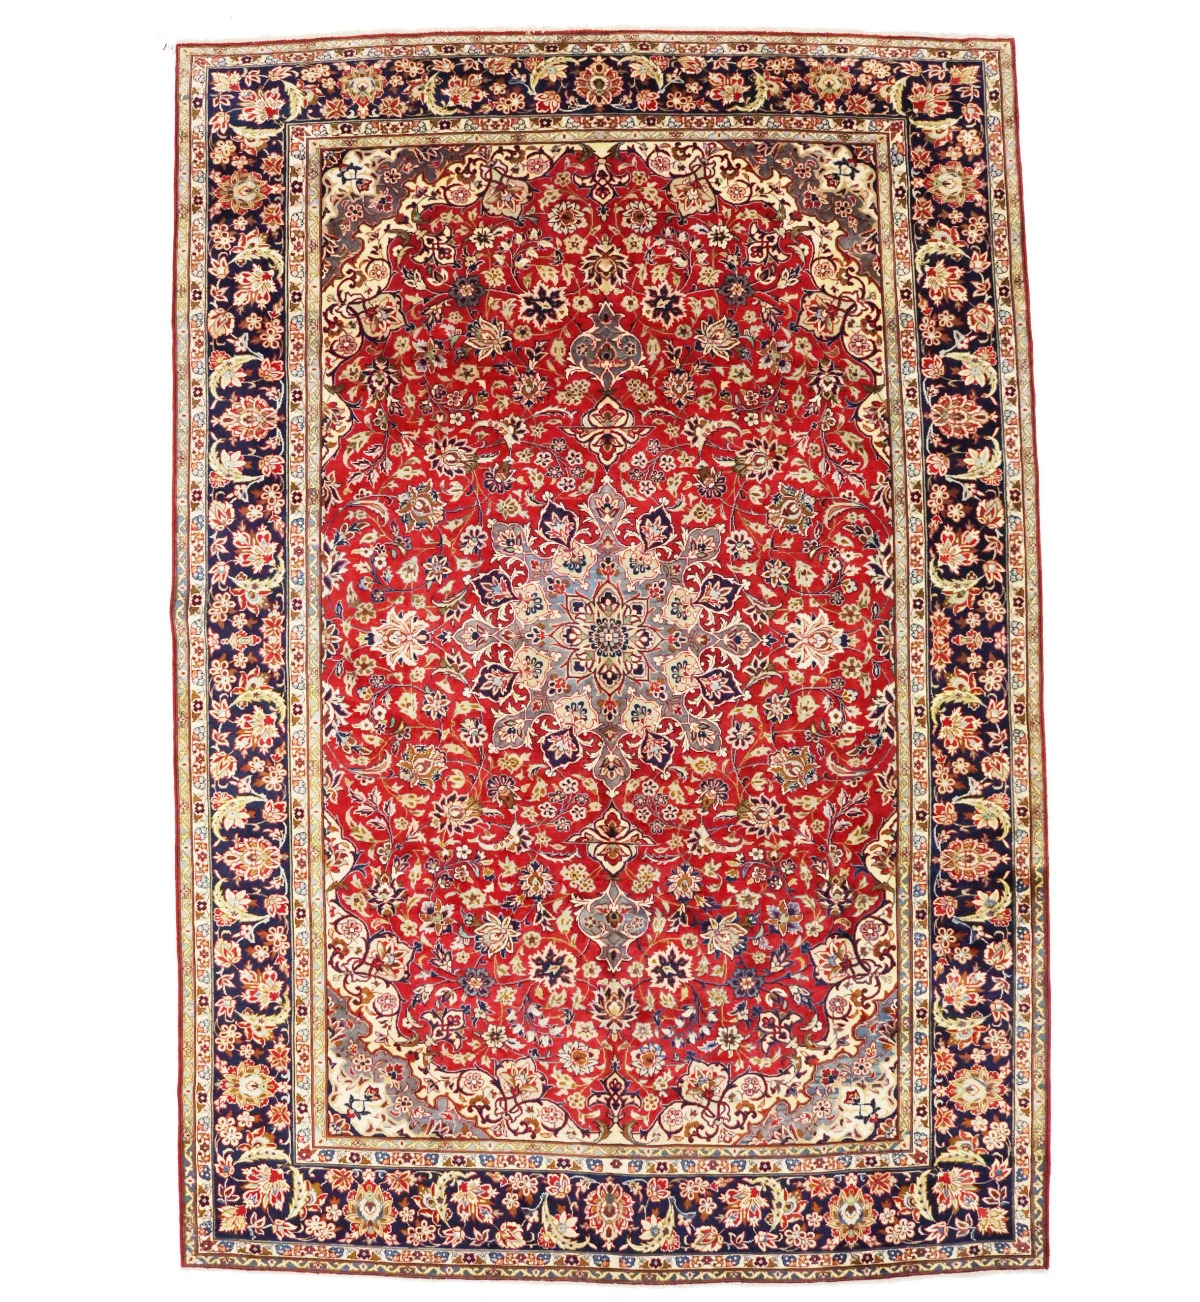 Vintage Semi Antique Classic Traditional Floral Large 9X13 Handmade Hand-Knotted Oriental Rug Carpet